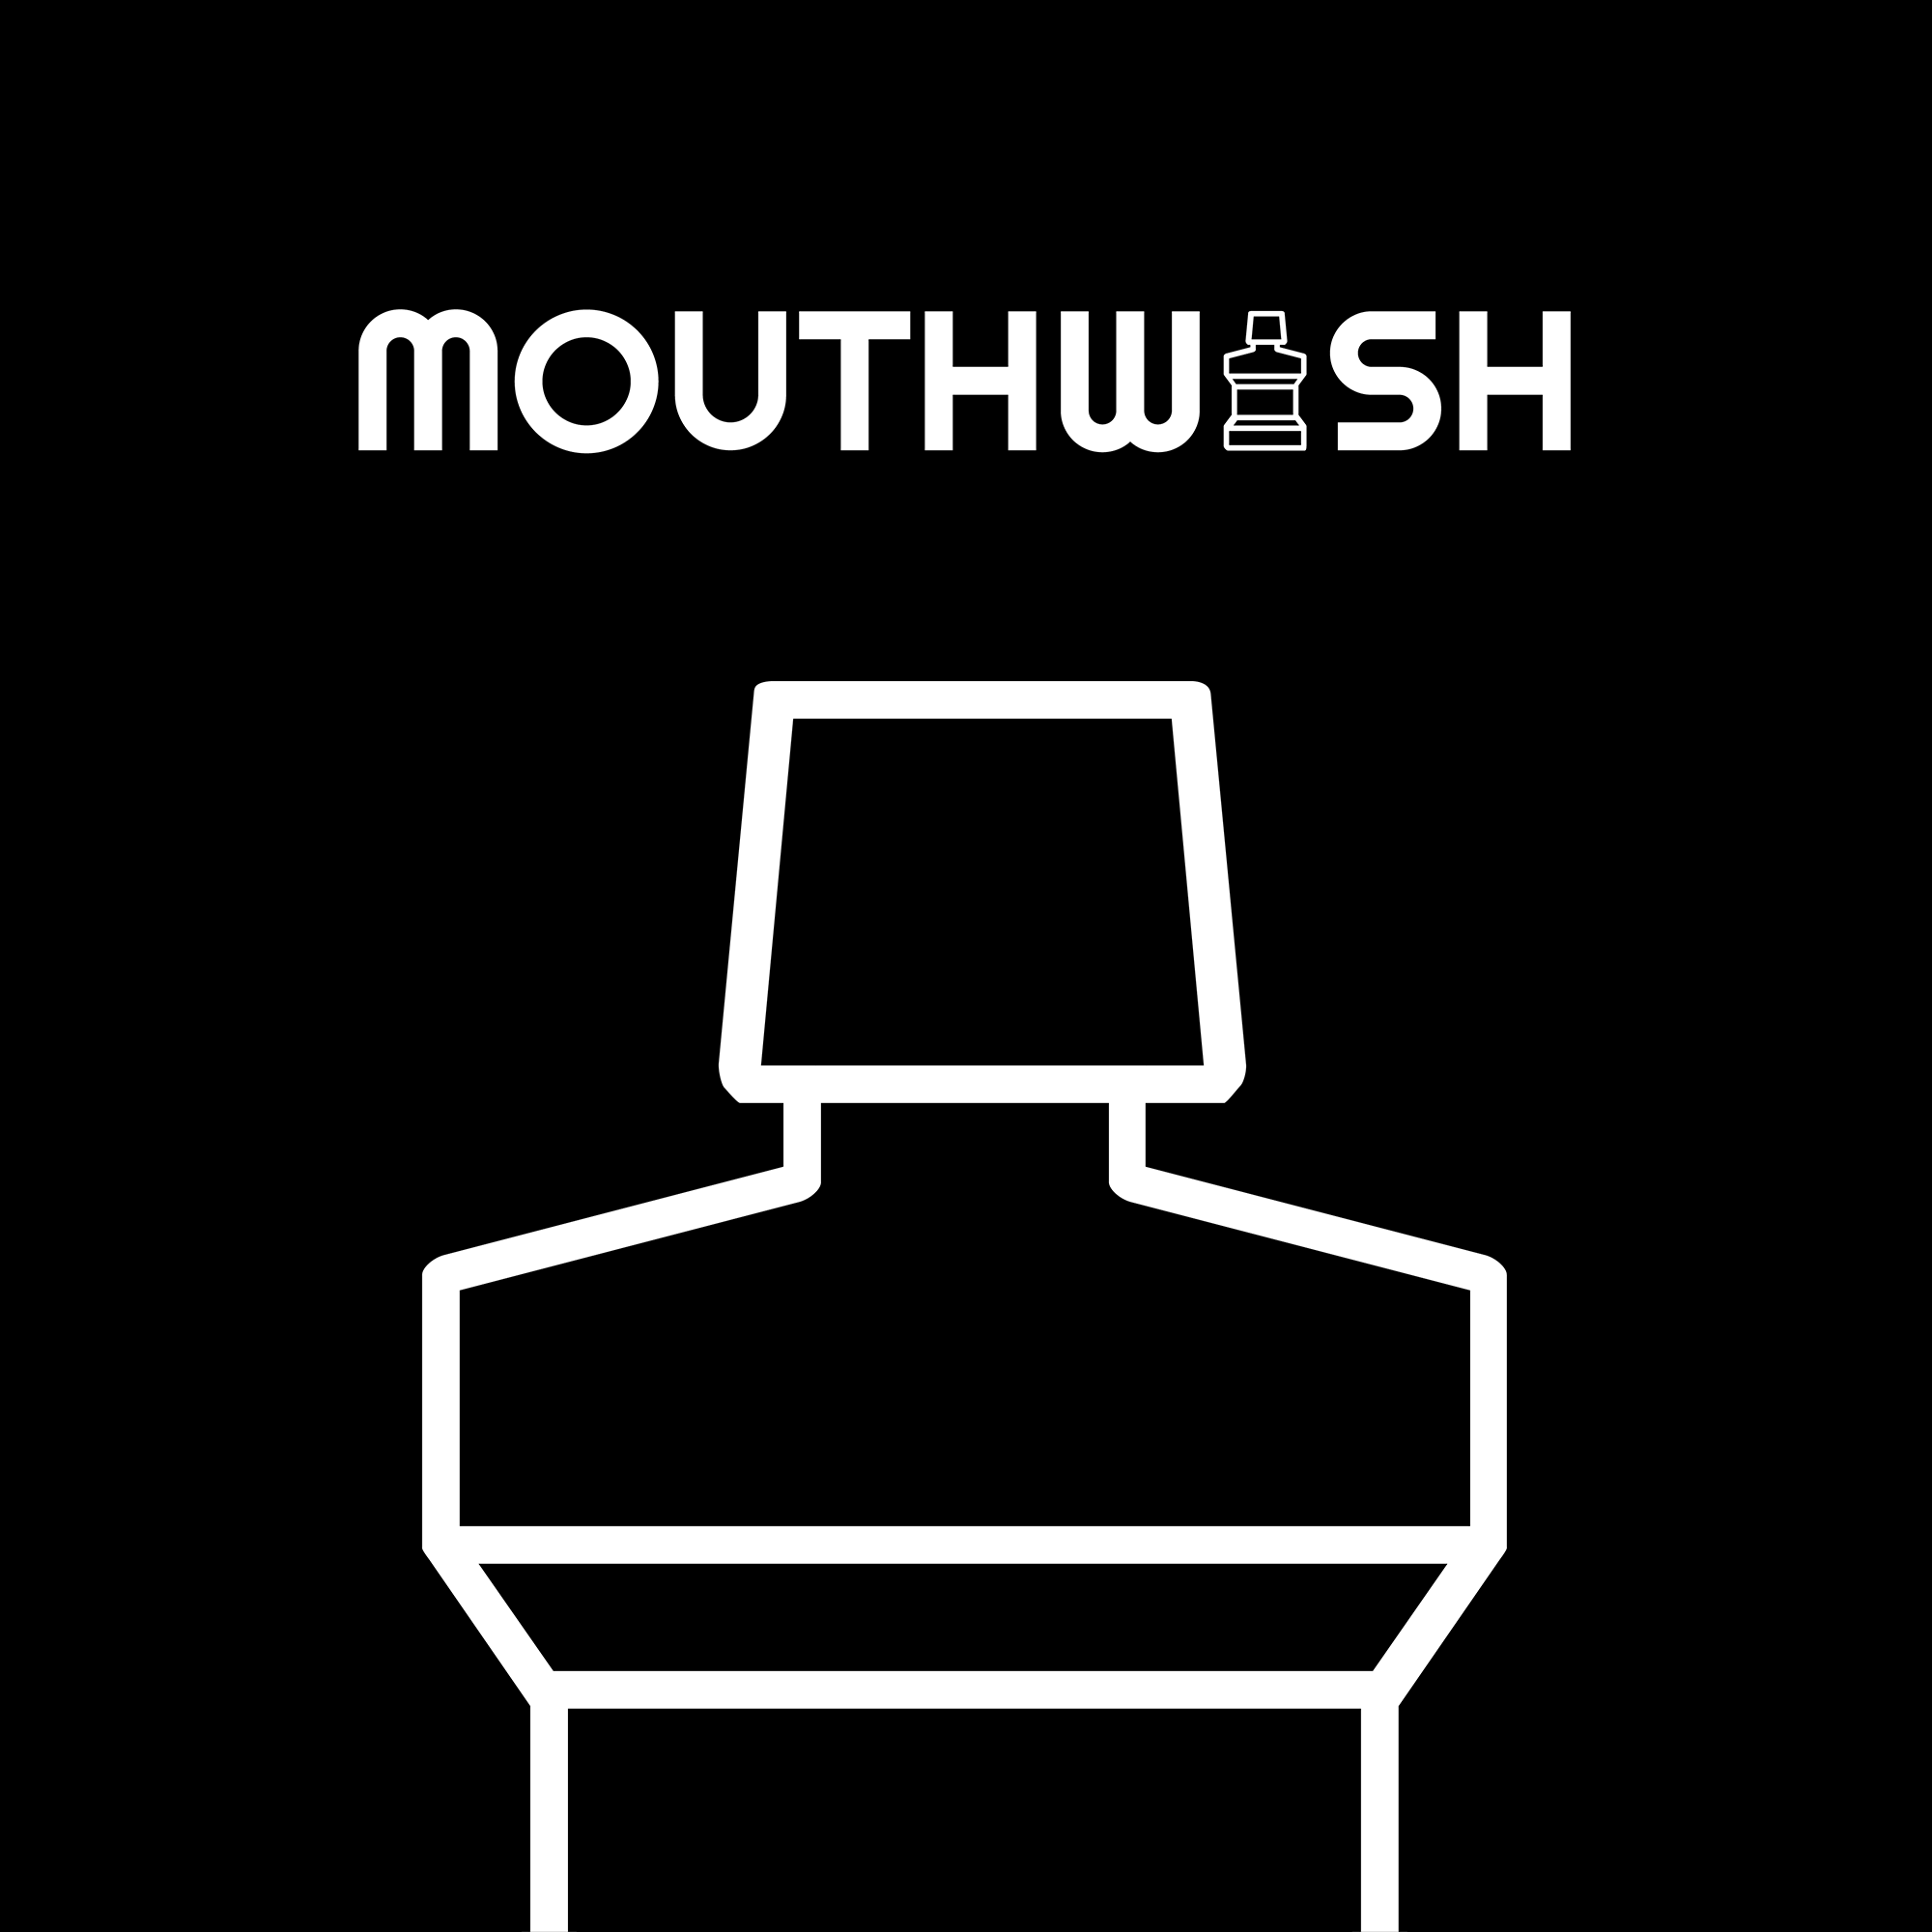 Get a text when Mouthwash is about to go live!